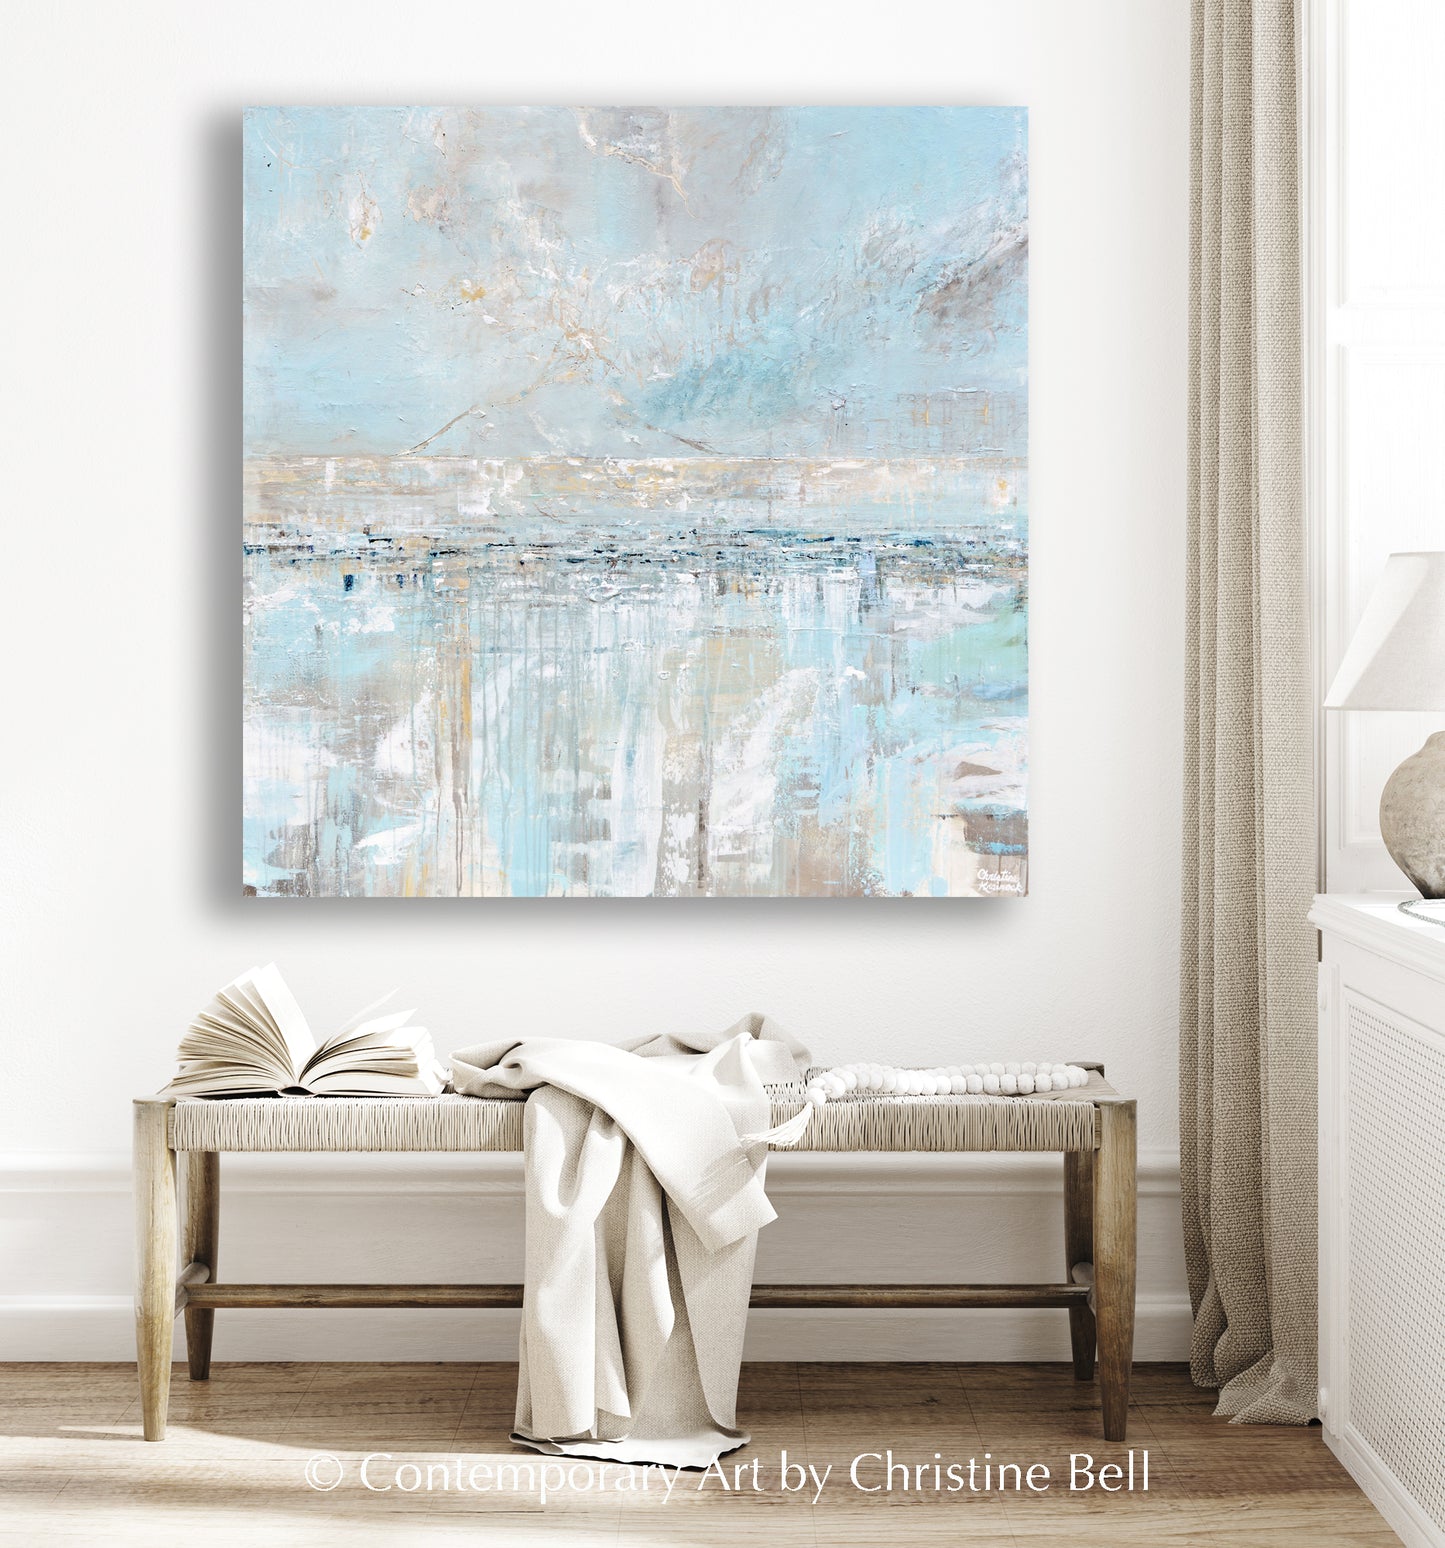 Trending Modern Coastal Abstract Paintings Prints Canvas Prints Wall Art beach home decor for Interior Design by Artist, Christine Bell